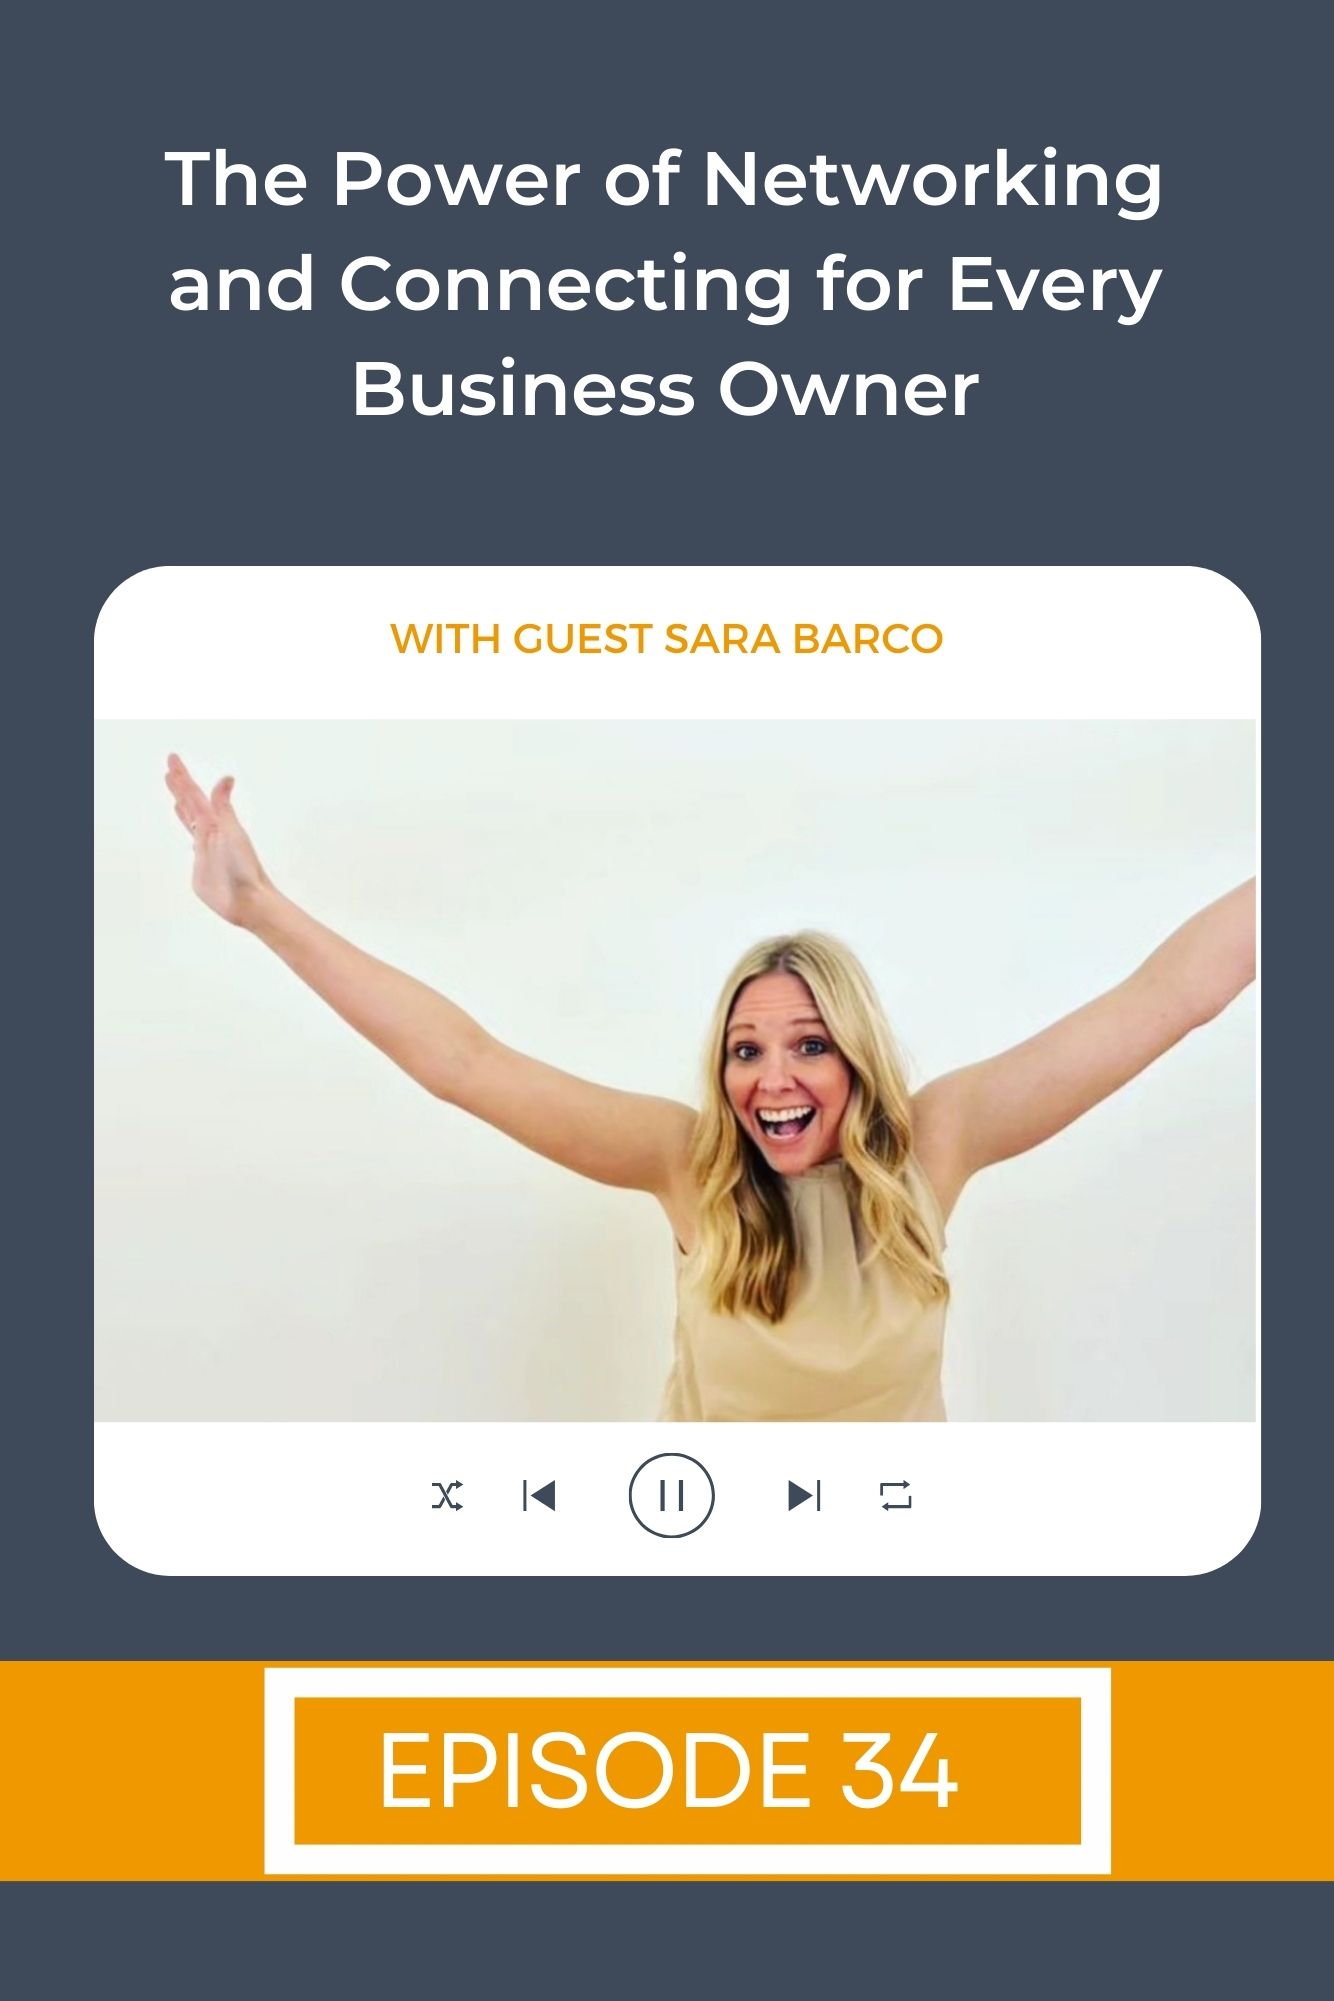 A woman in a yellow shirt with her arms out and a smile on her face depecting the power of networking and connecting for every business owner for a christian business podcast for women.